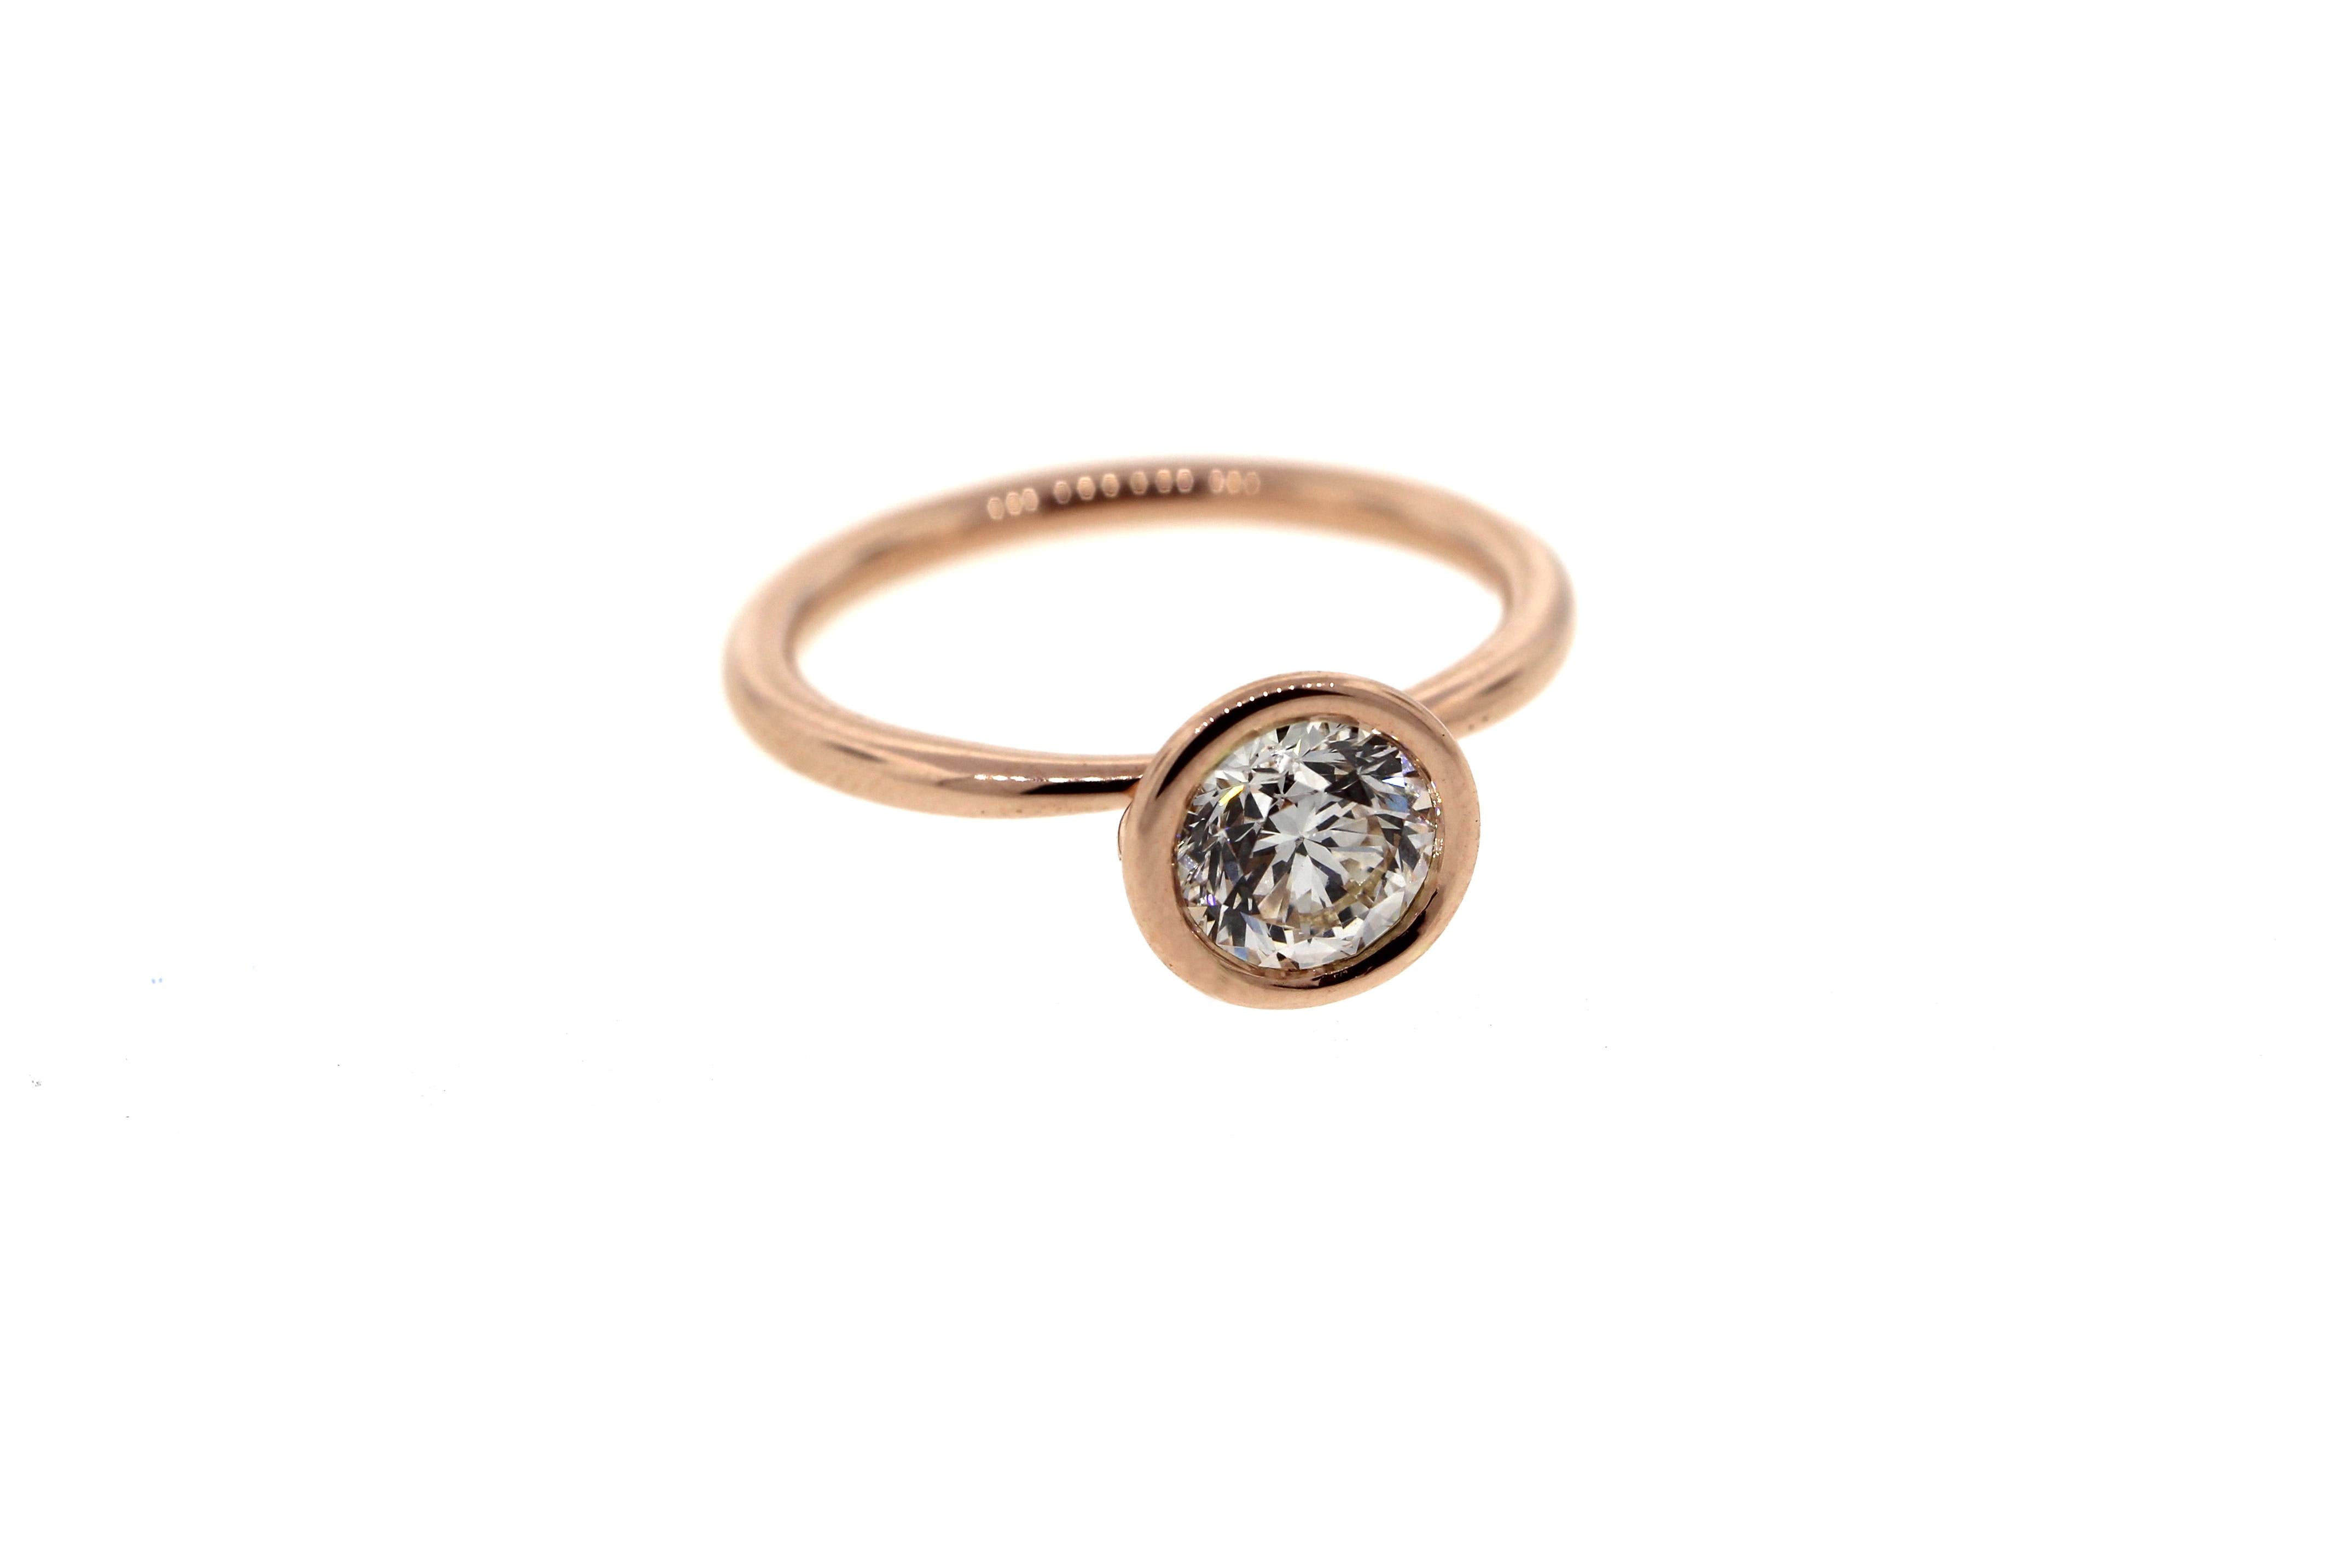 This beautiful bezel set diamond engagement ring is in rose gold and features a round brilliant cut GIA certified white diamond. 

Please note that each piece we make is customized to our client's specifications and the specifications for this ring